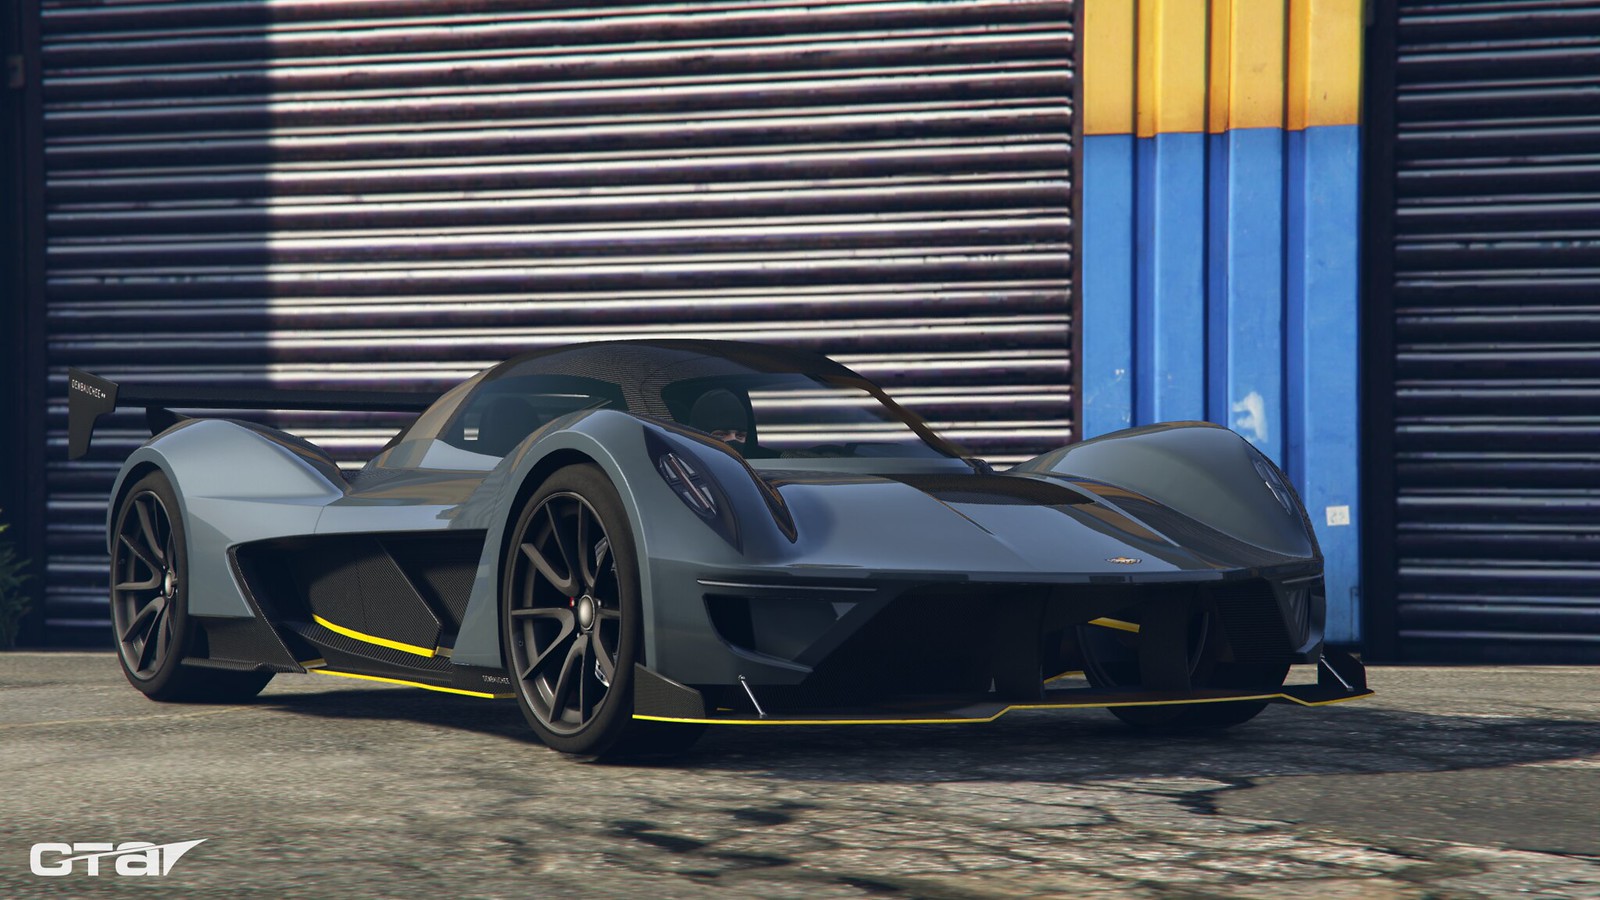 Fastest supercars in gta 5